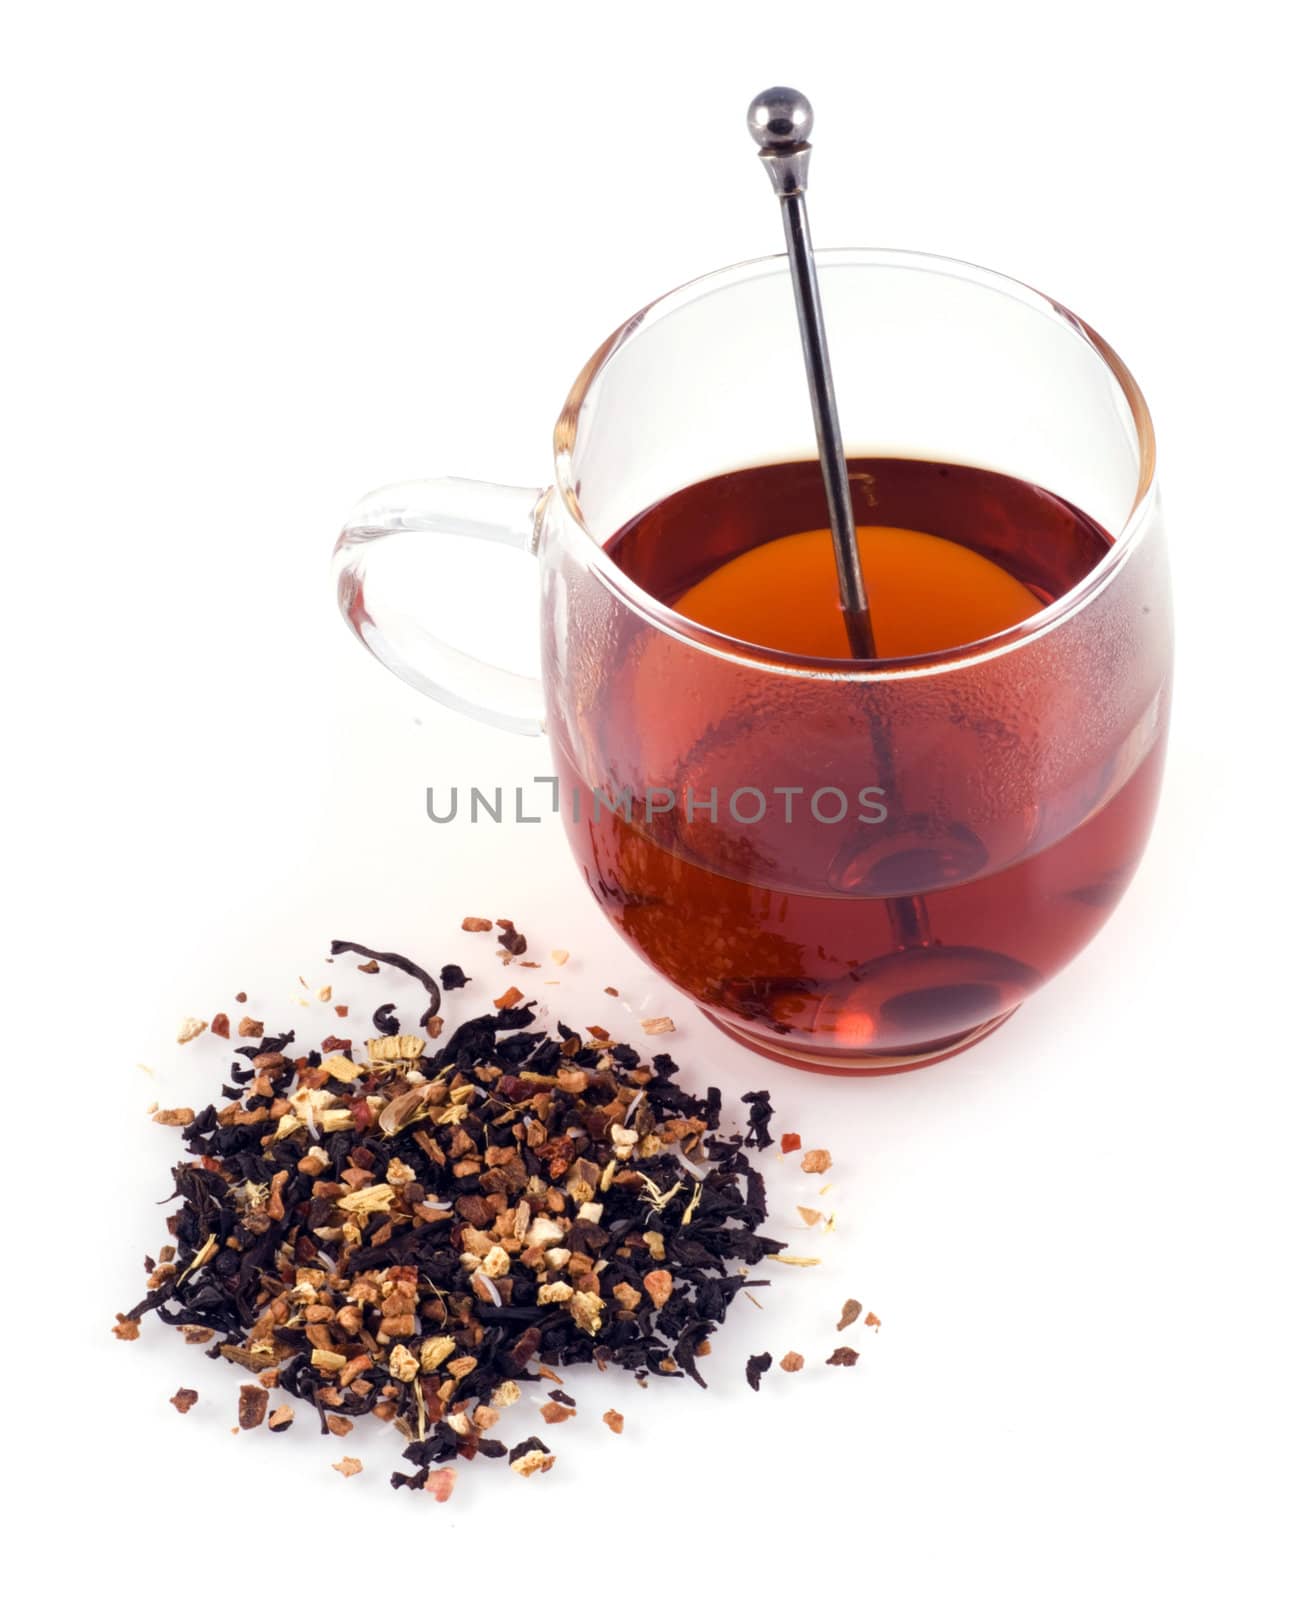 Glass of tea with some dried tea next to the glass on a white background.